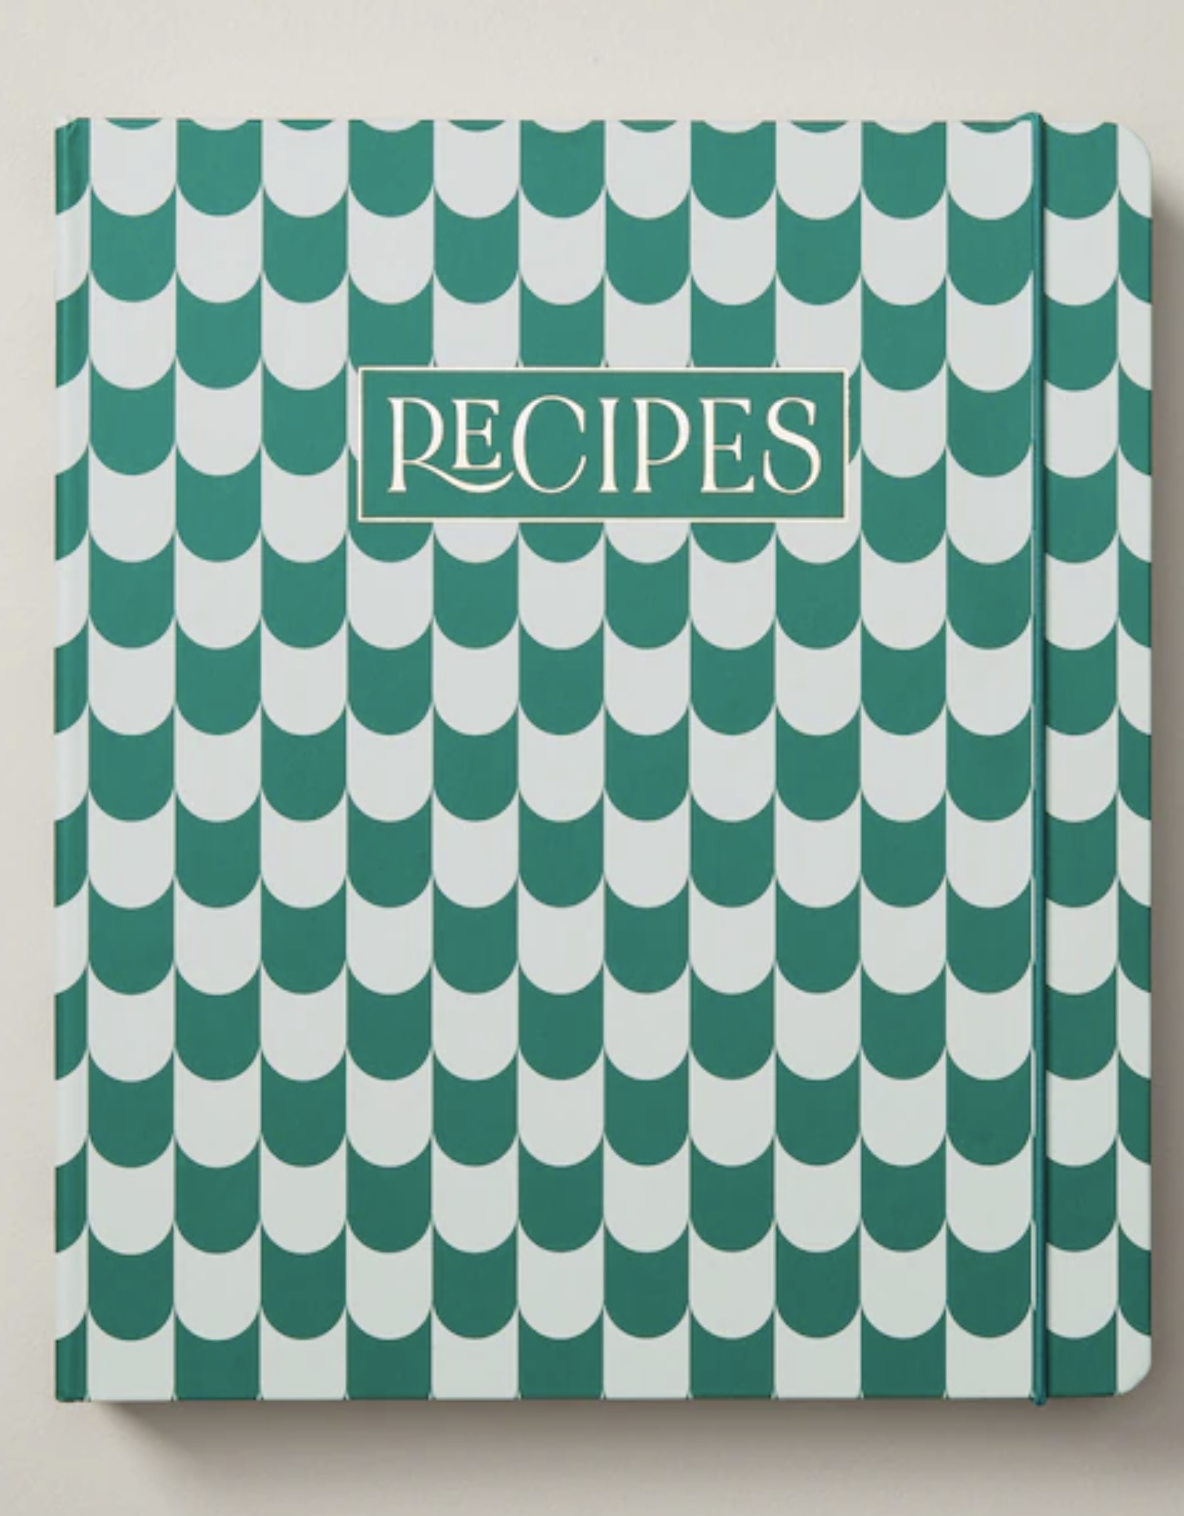 The recipe book on a blank background